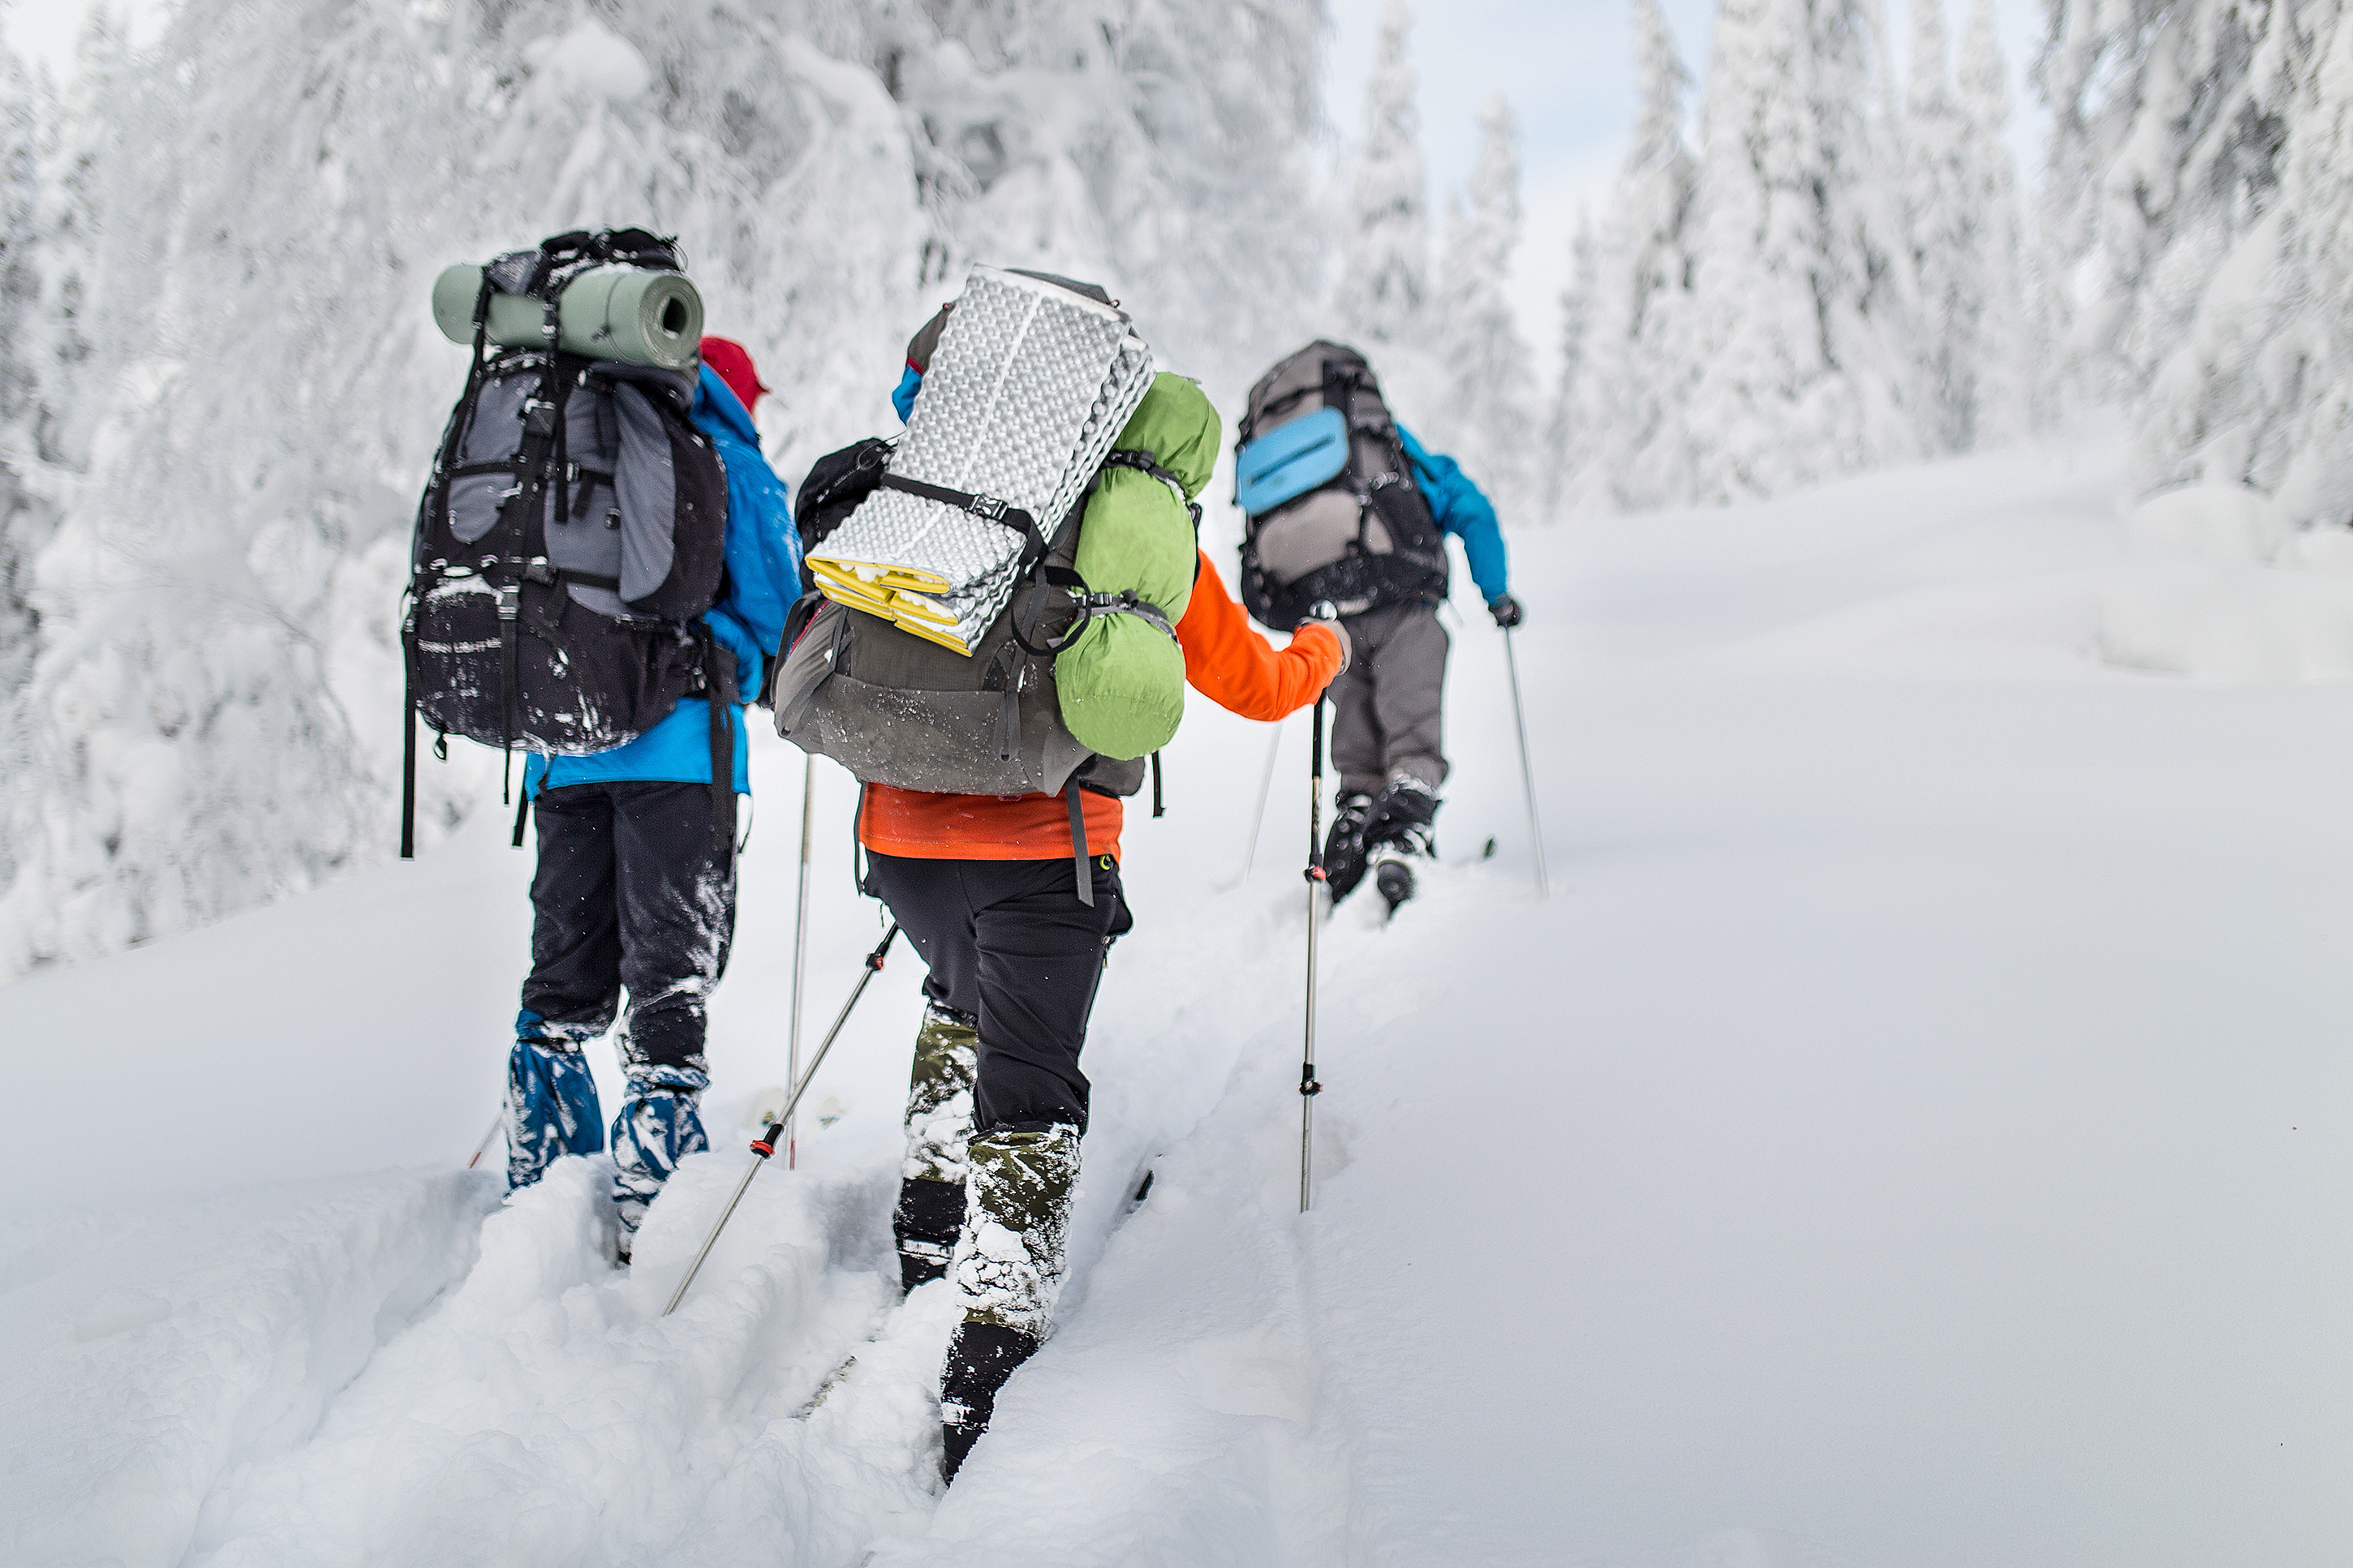 Three skiers walking through the wilderness with gear to prevent frostbite